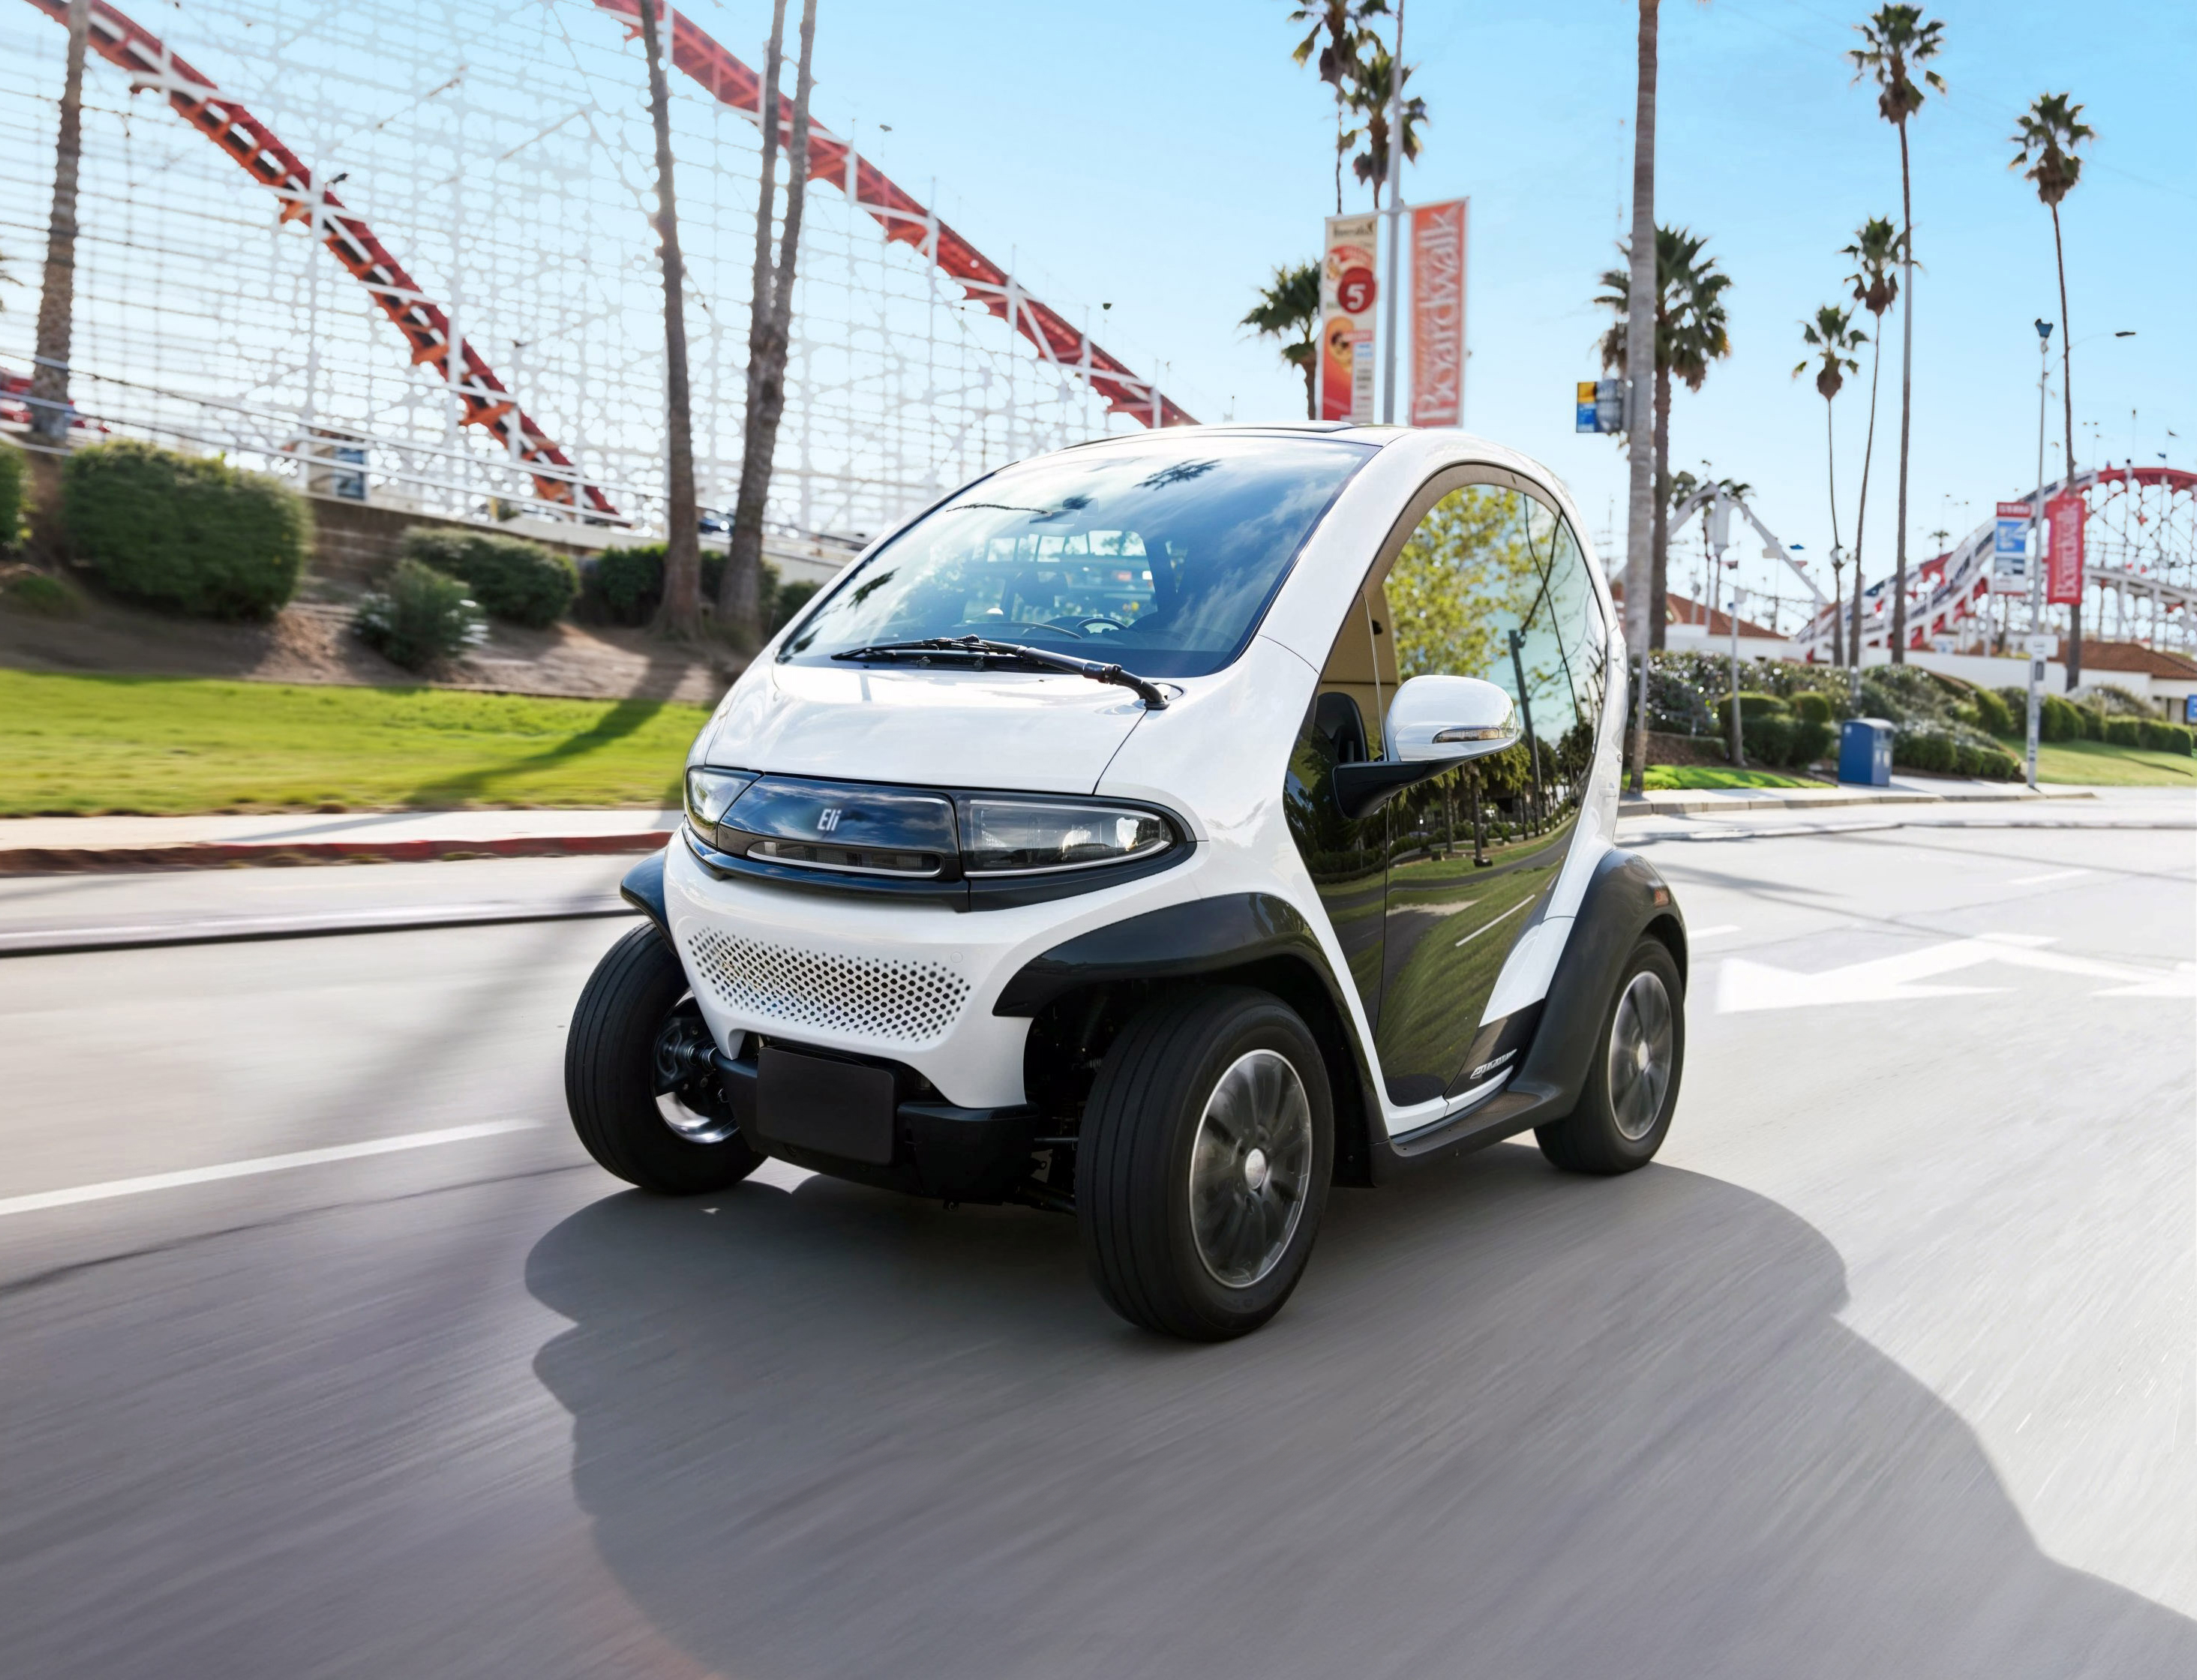 Eli ZERO will enter the U.S. market with an upgraded version of its street-legal LSV designed for daily trips, building on the company’s success in the European market.